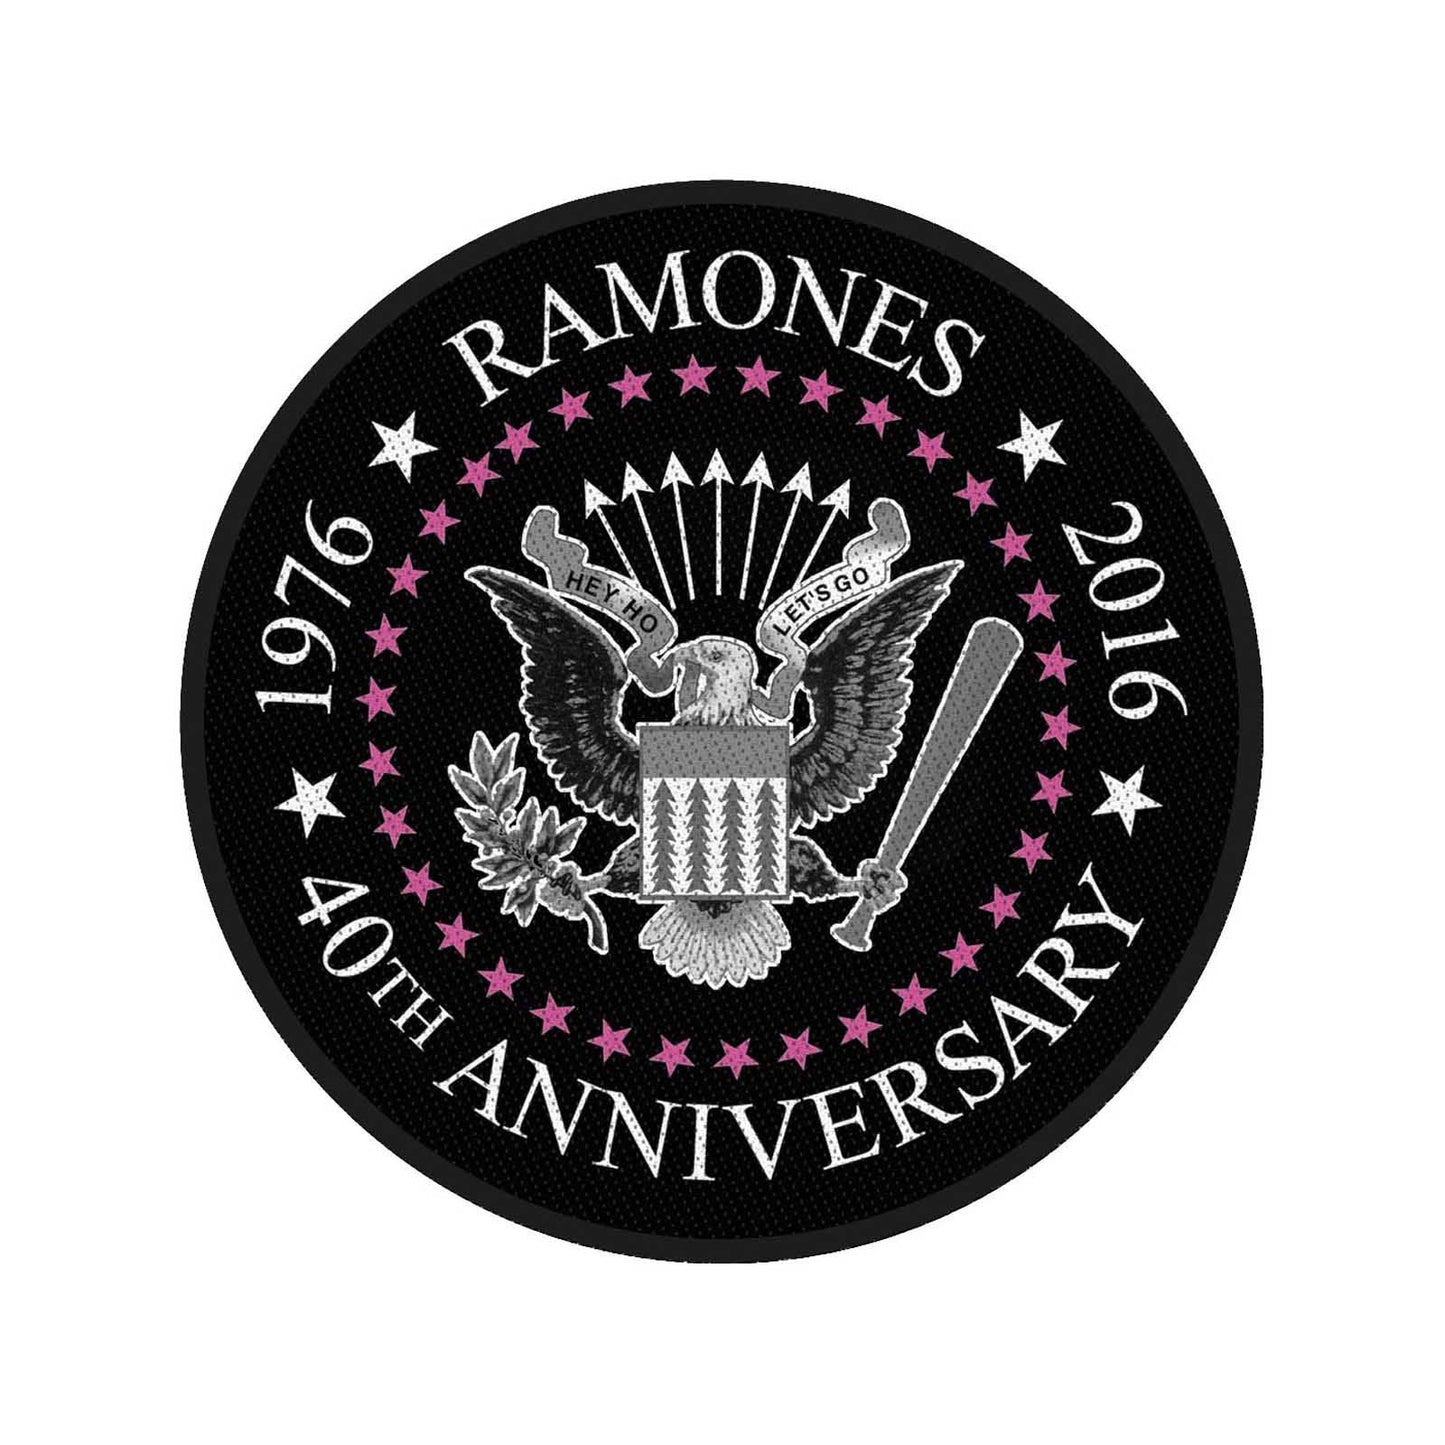 Ramones Patch 40th Anniversary - Zhivago Gifts